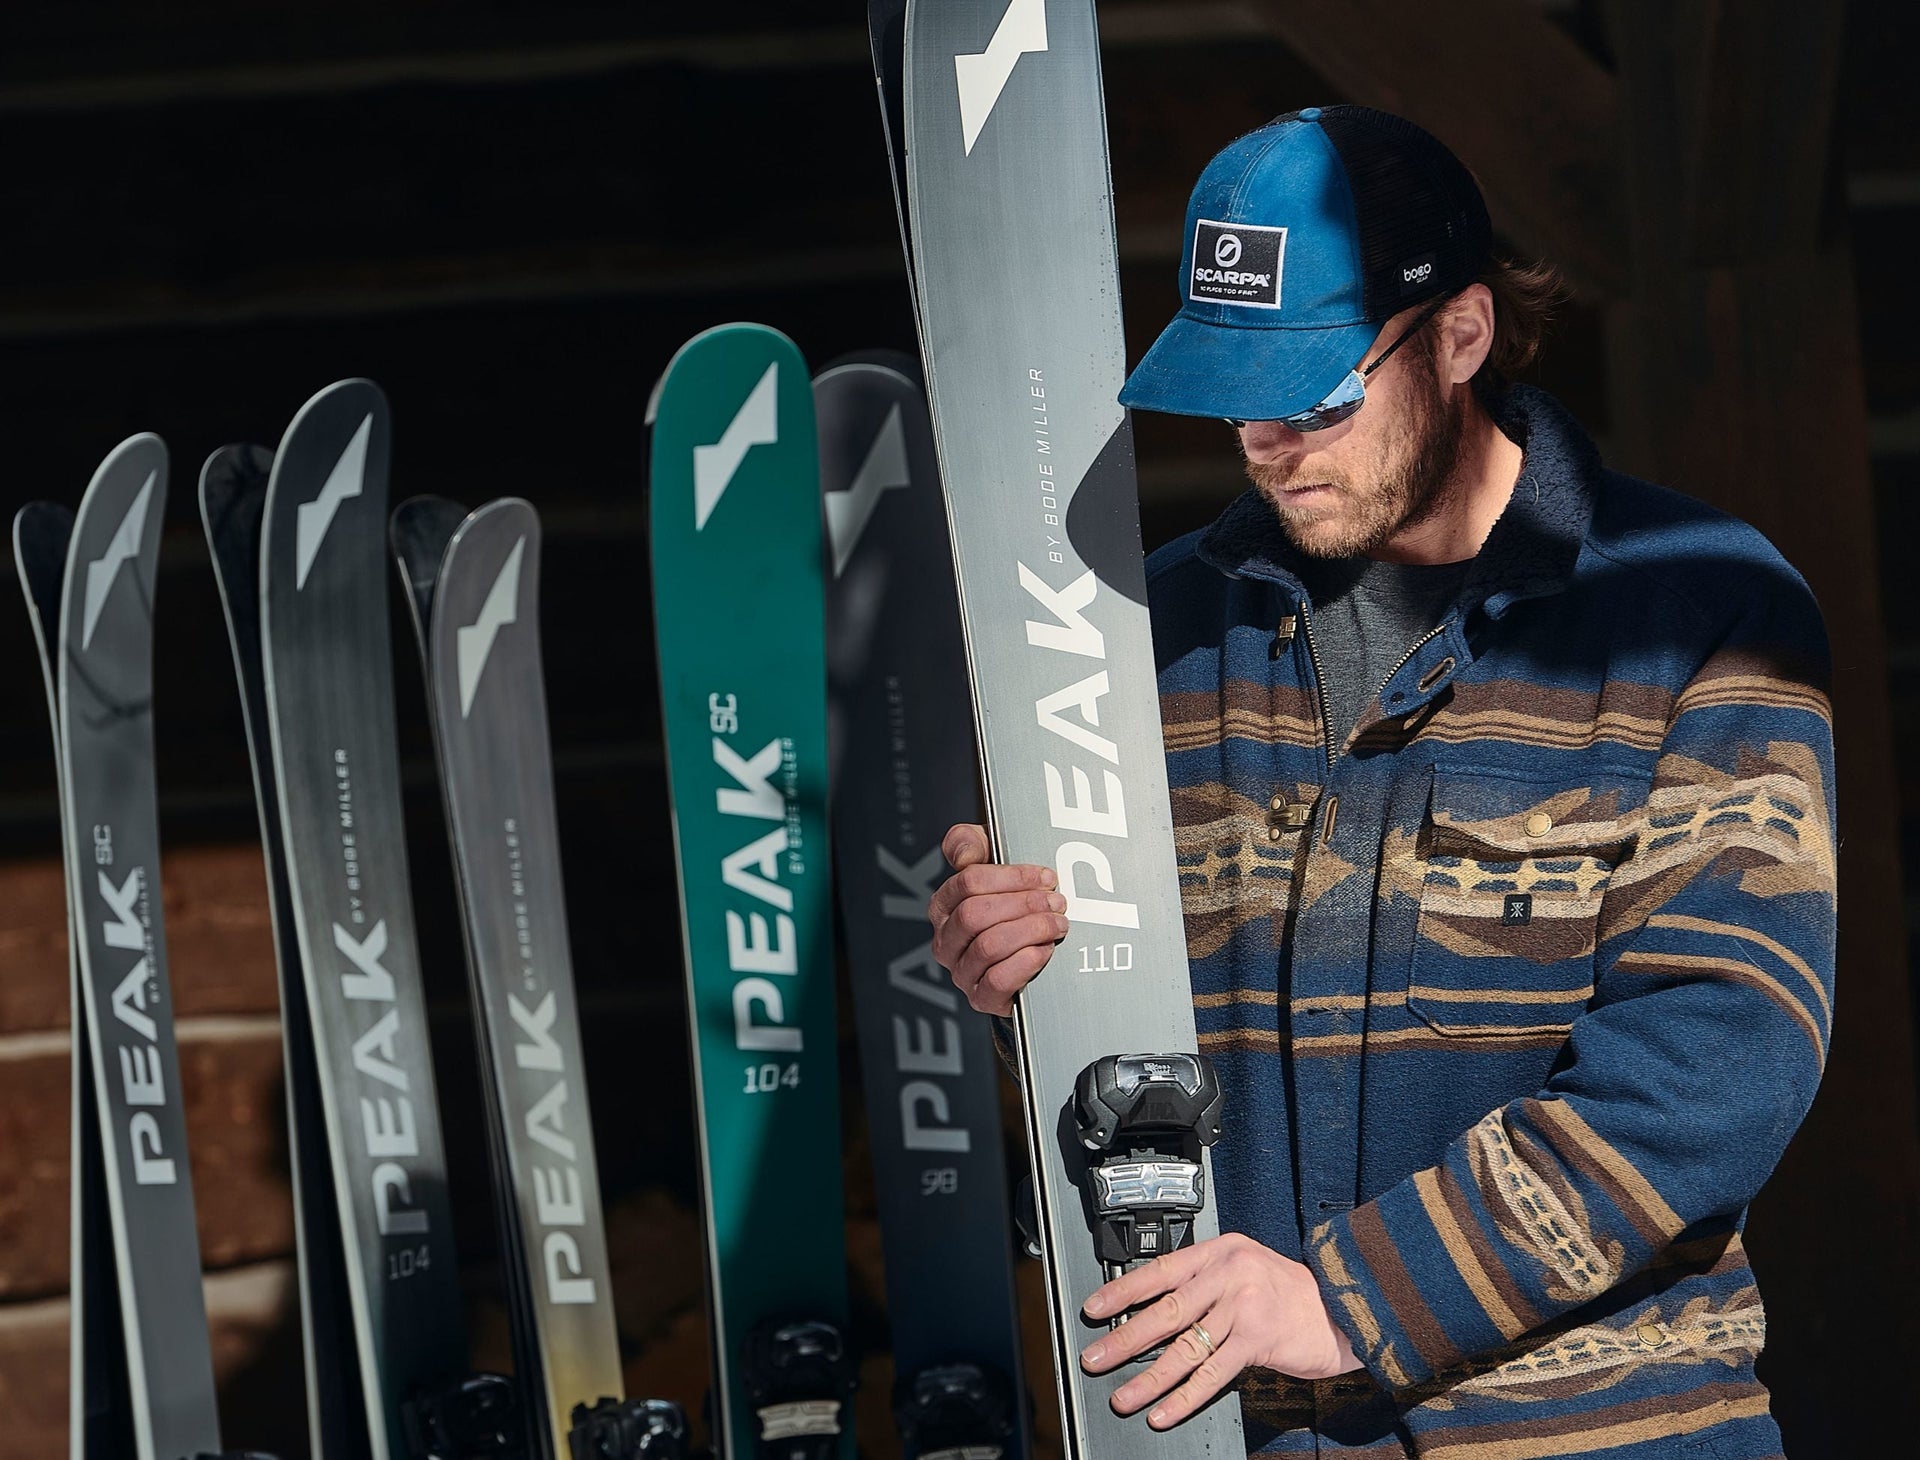 Bode Miller standing with sets of Peak Skis